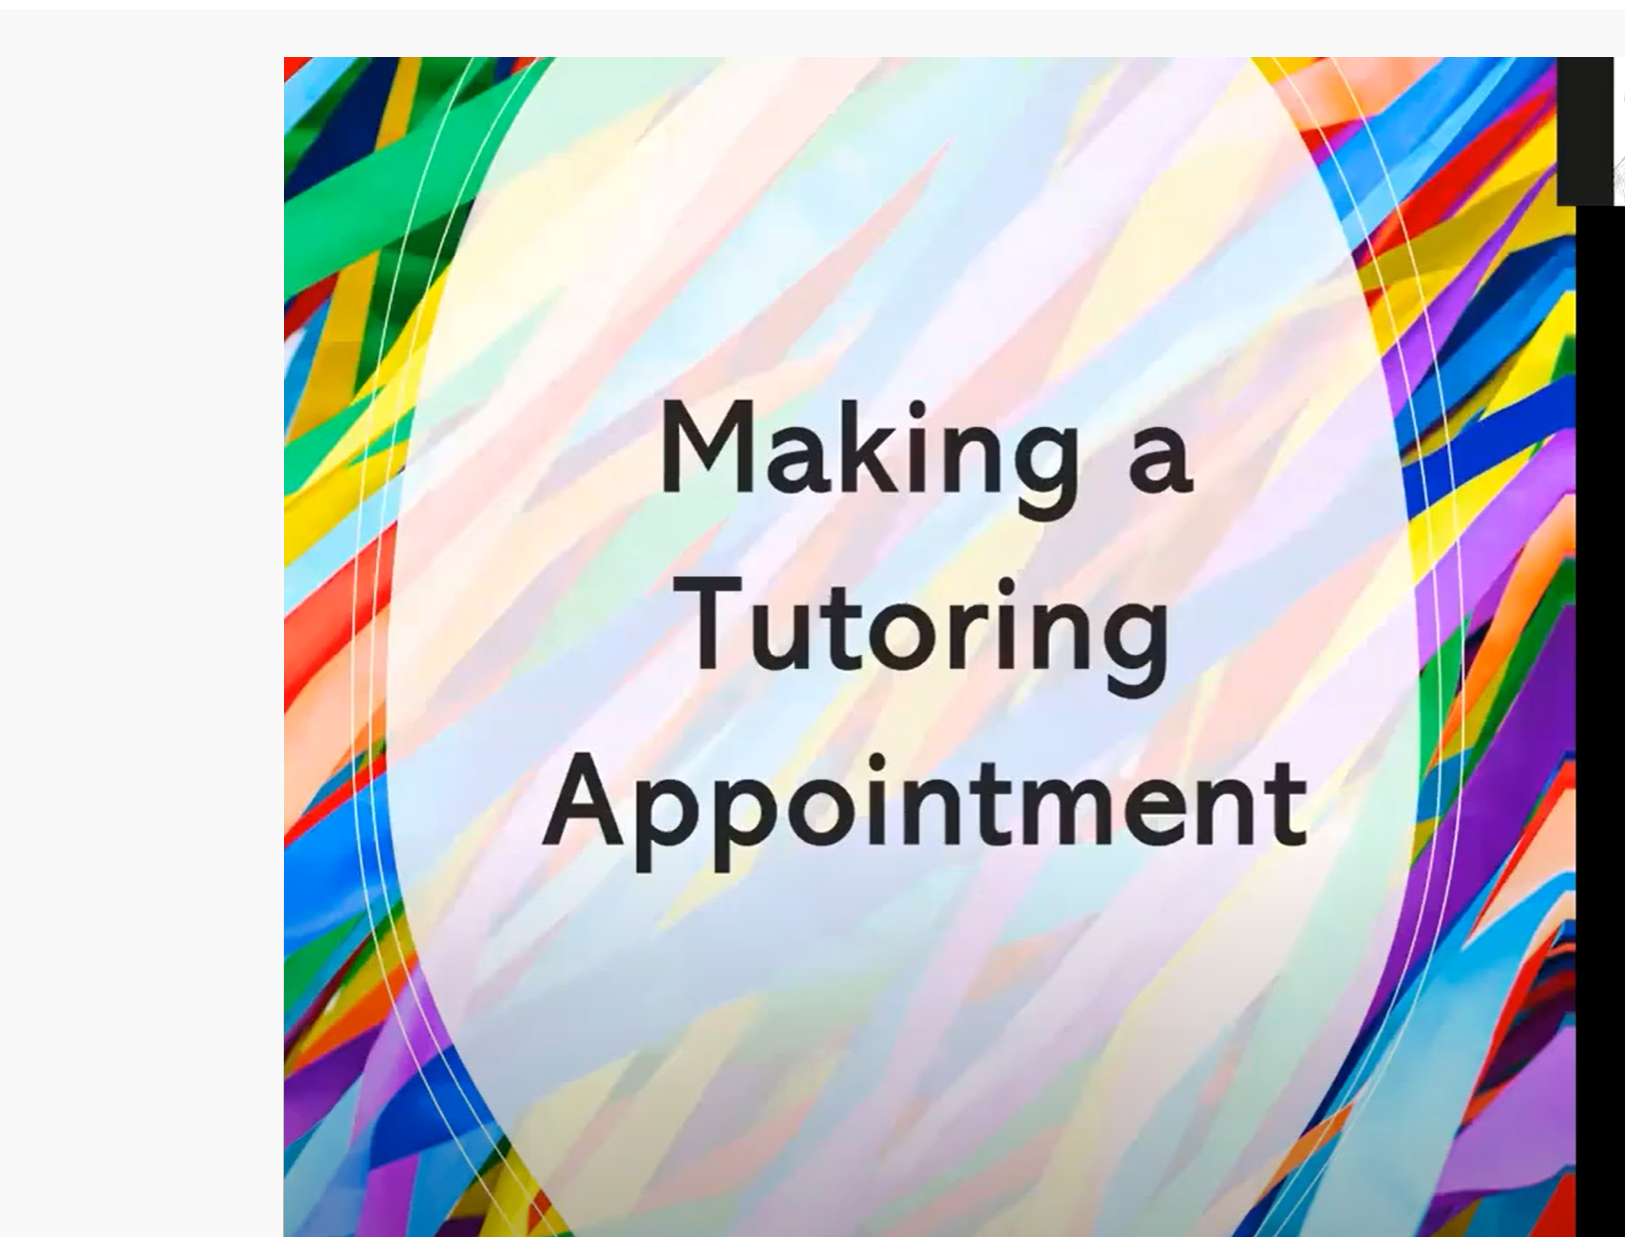 Multicolor background with the words "Making a Tutoring Appointment"